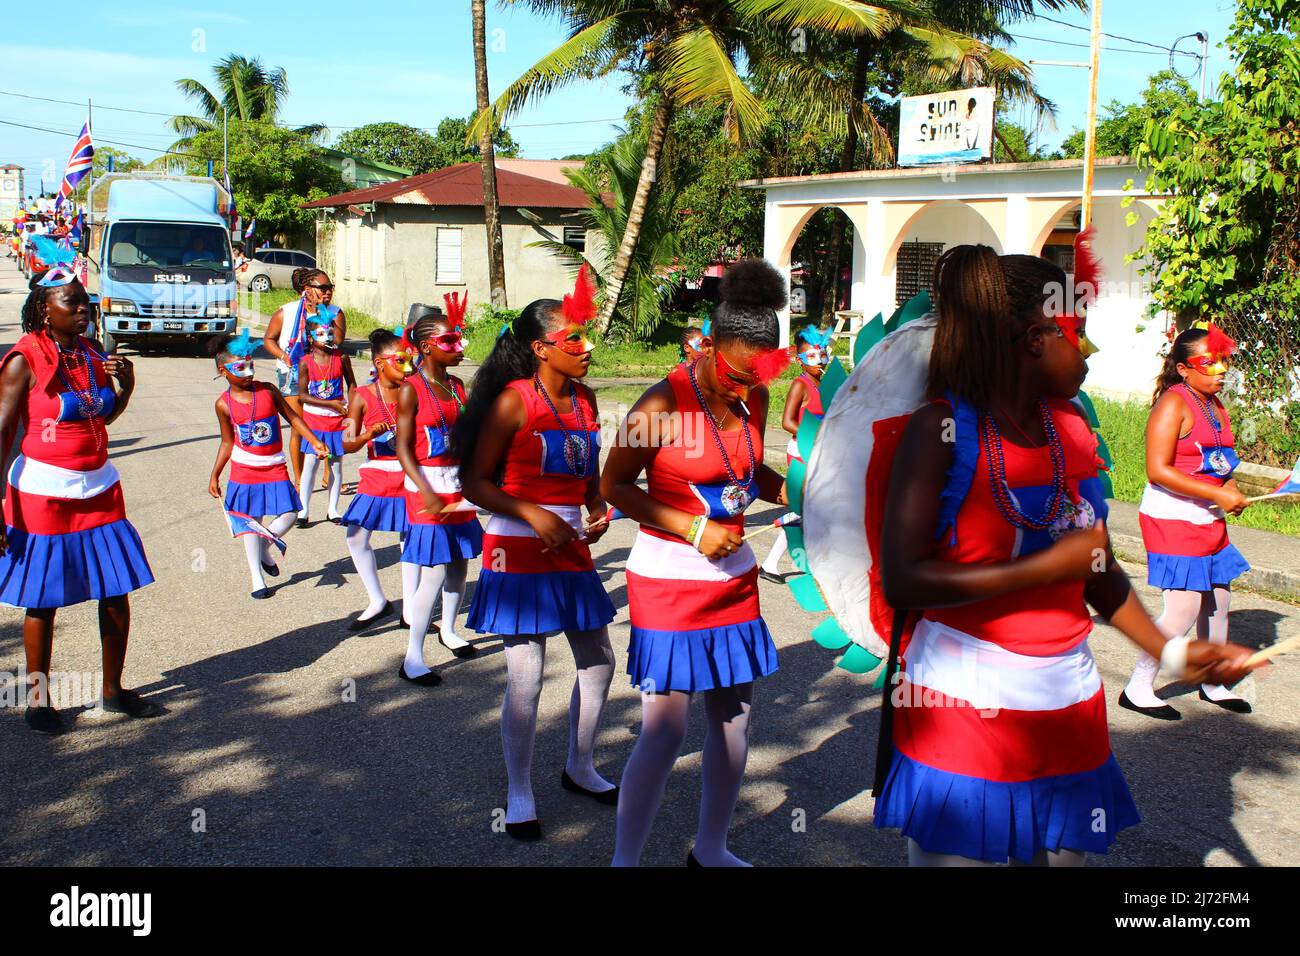 PUNTA GORDA, BELIZE - SEPTEMBER 10, 2015 St. George’s Caye Day celebrations and carnival dancers with red, white and blue costumes walking Stock Photo